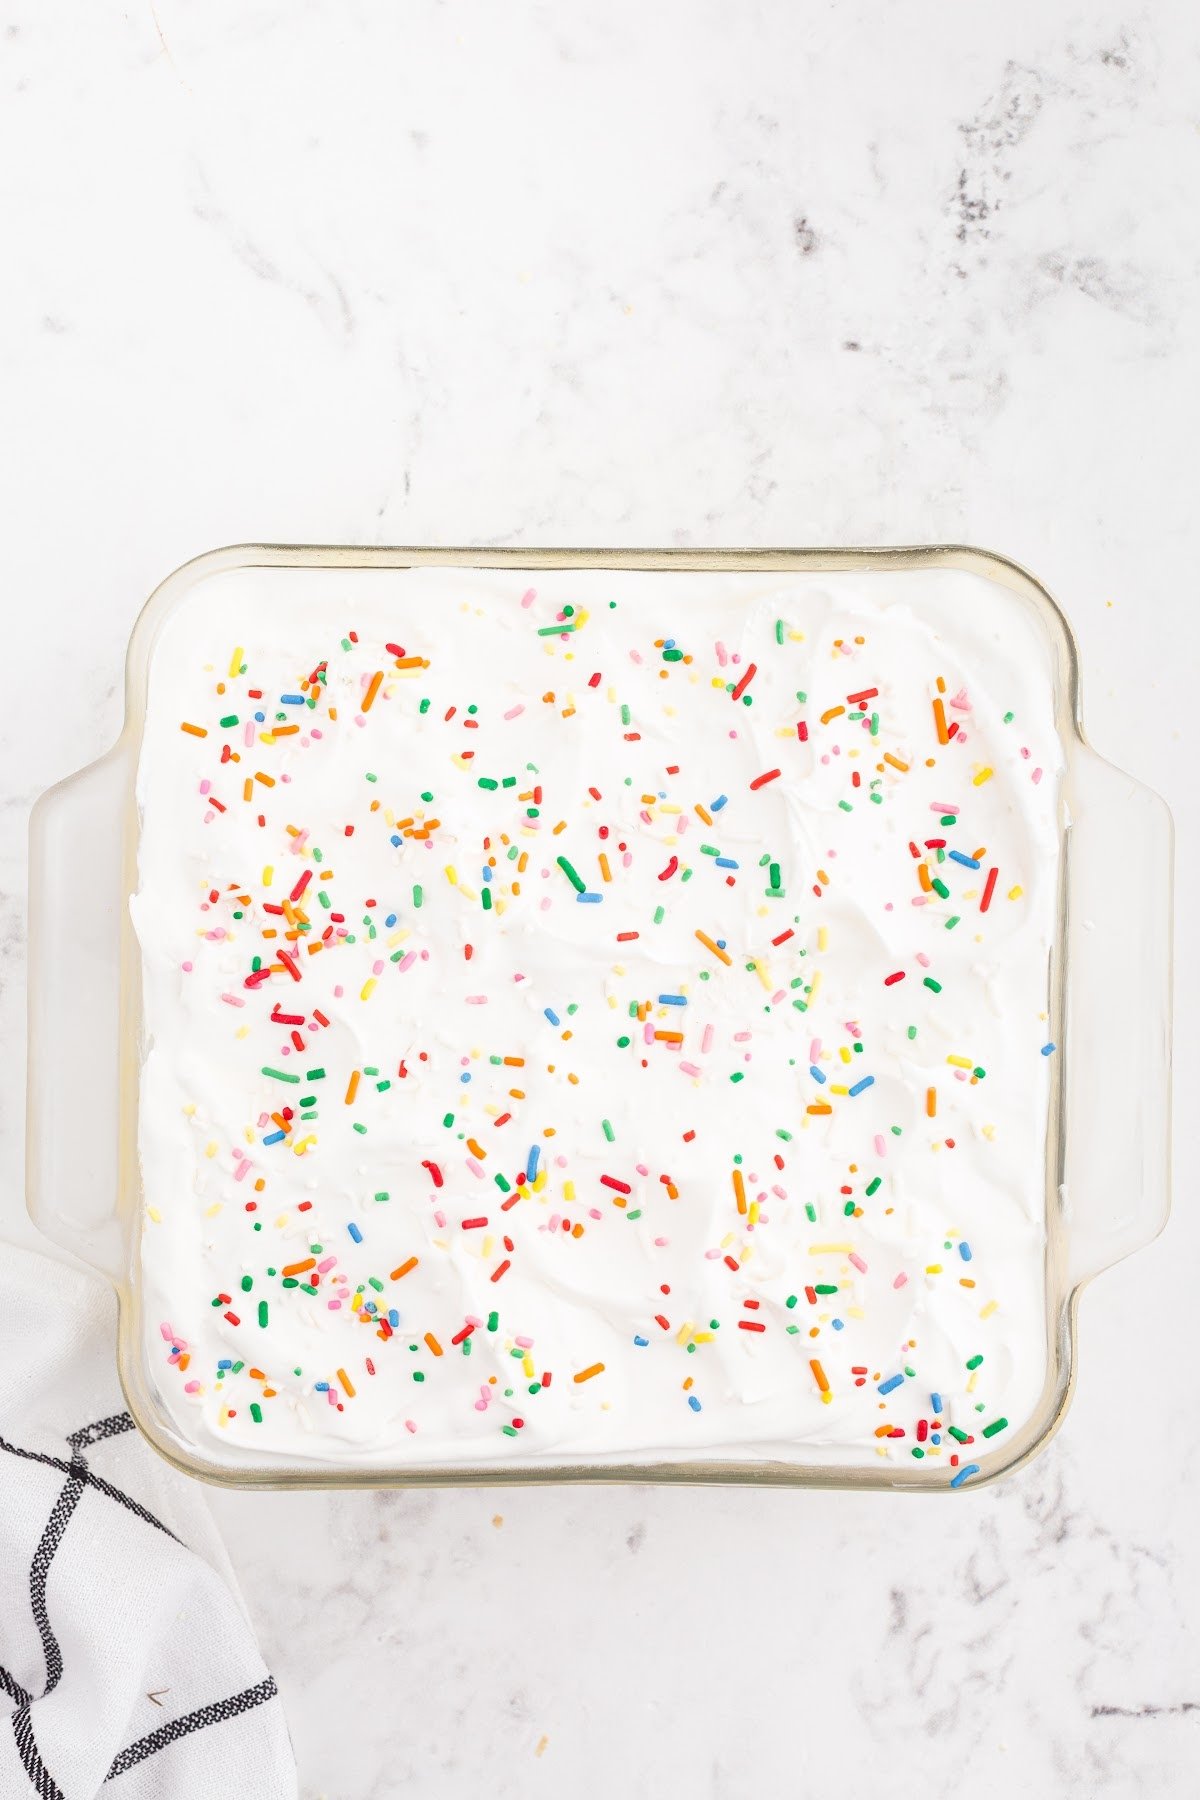 Finished cake in a baking dish topped with rainbow sprinkles.